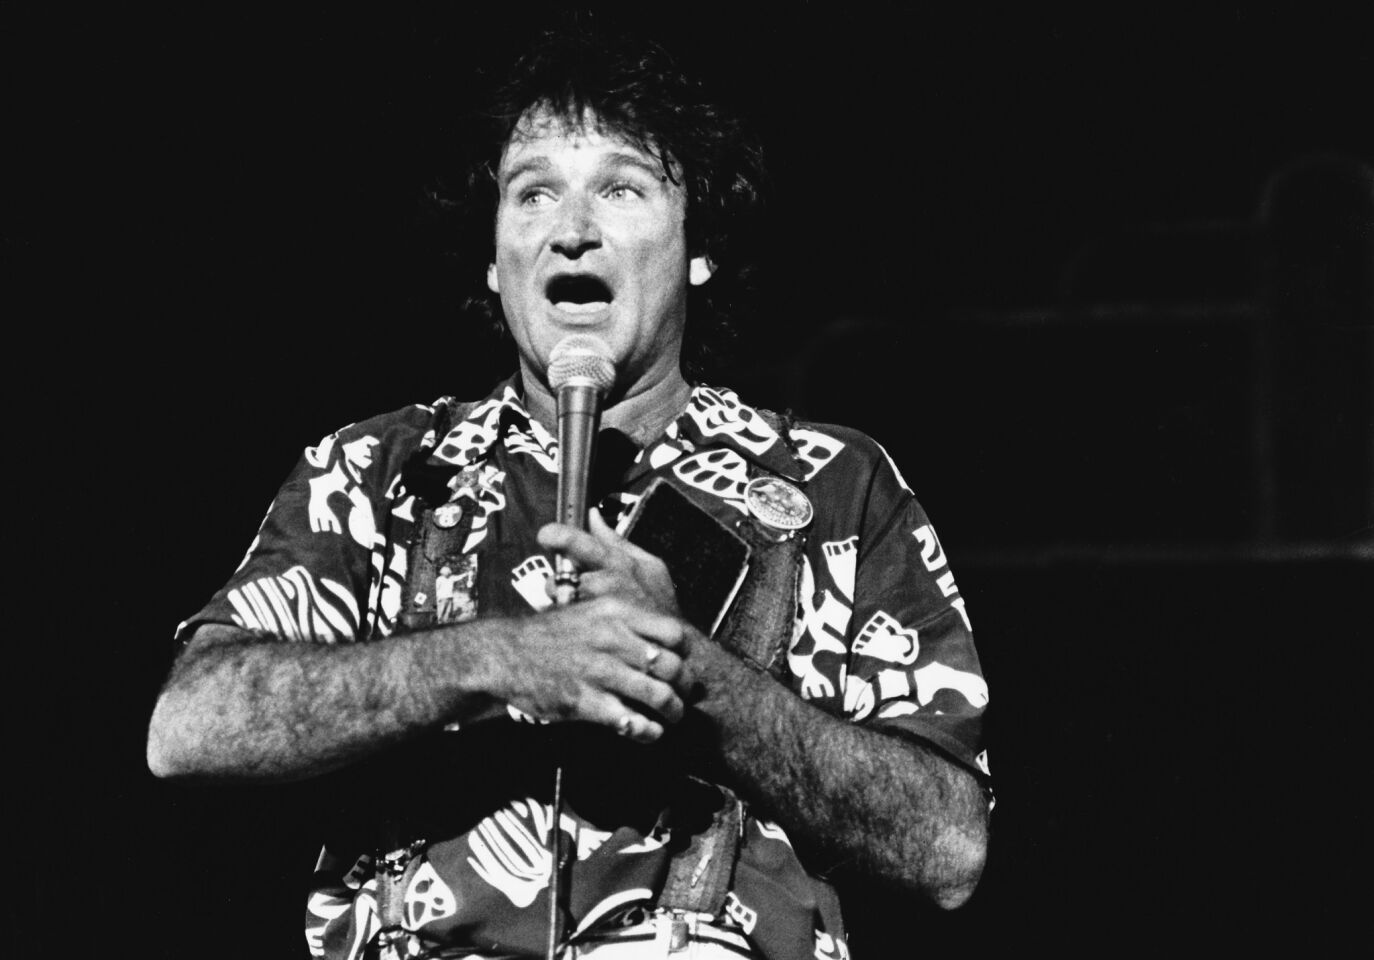 Robin Williams performs at the Universal Amphitheater on July 1, 1979